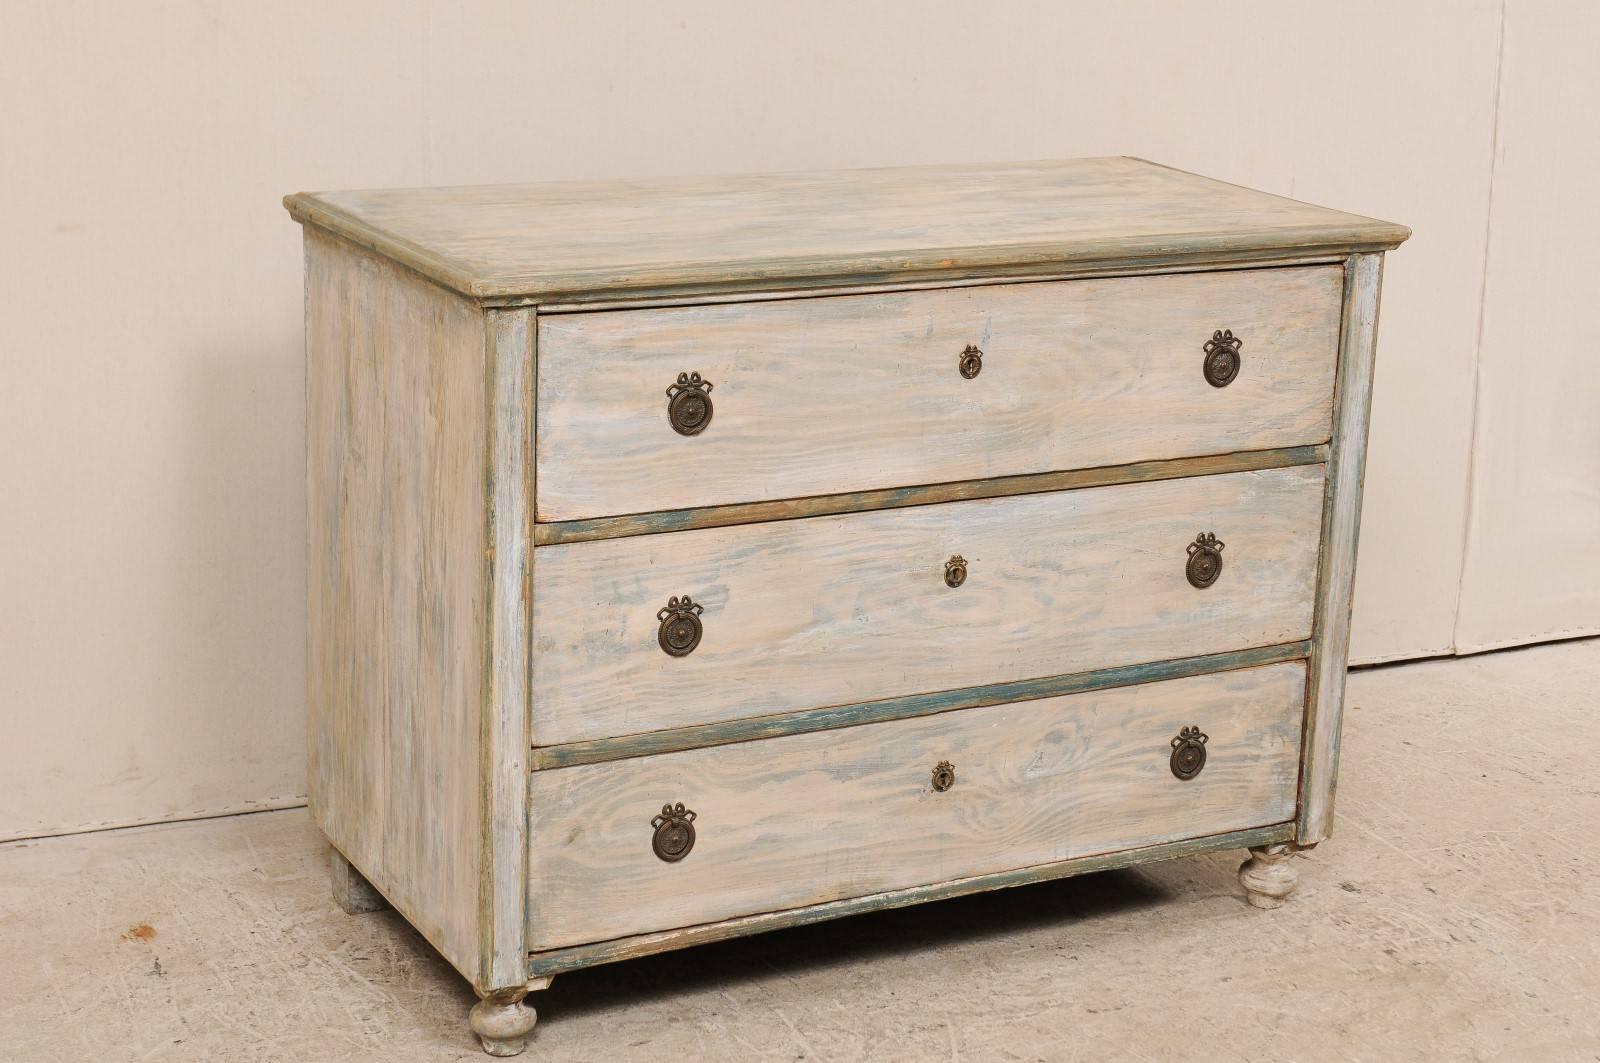 Carved Swedish Karl Johan Three-Drawer Painted Wood Chest in Cream and Soft Teal